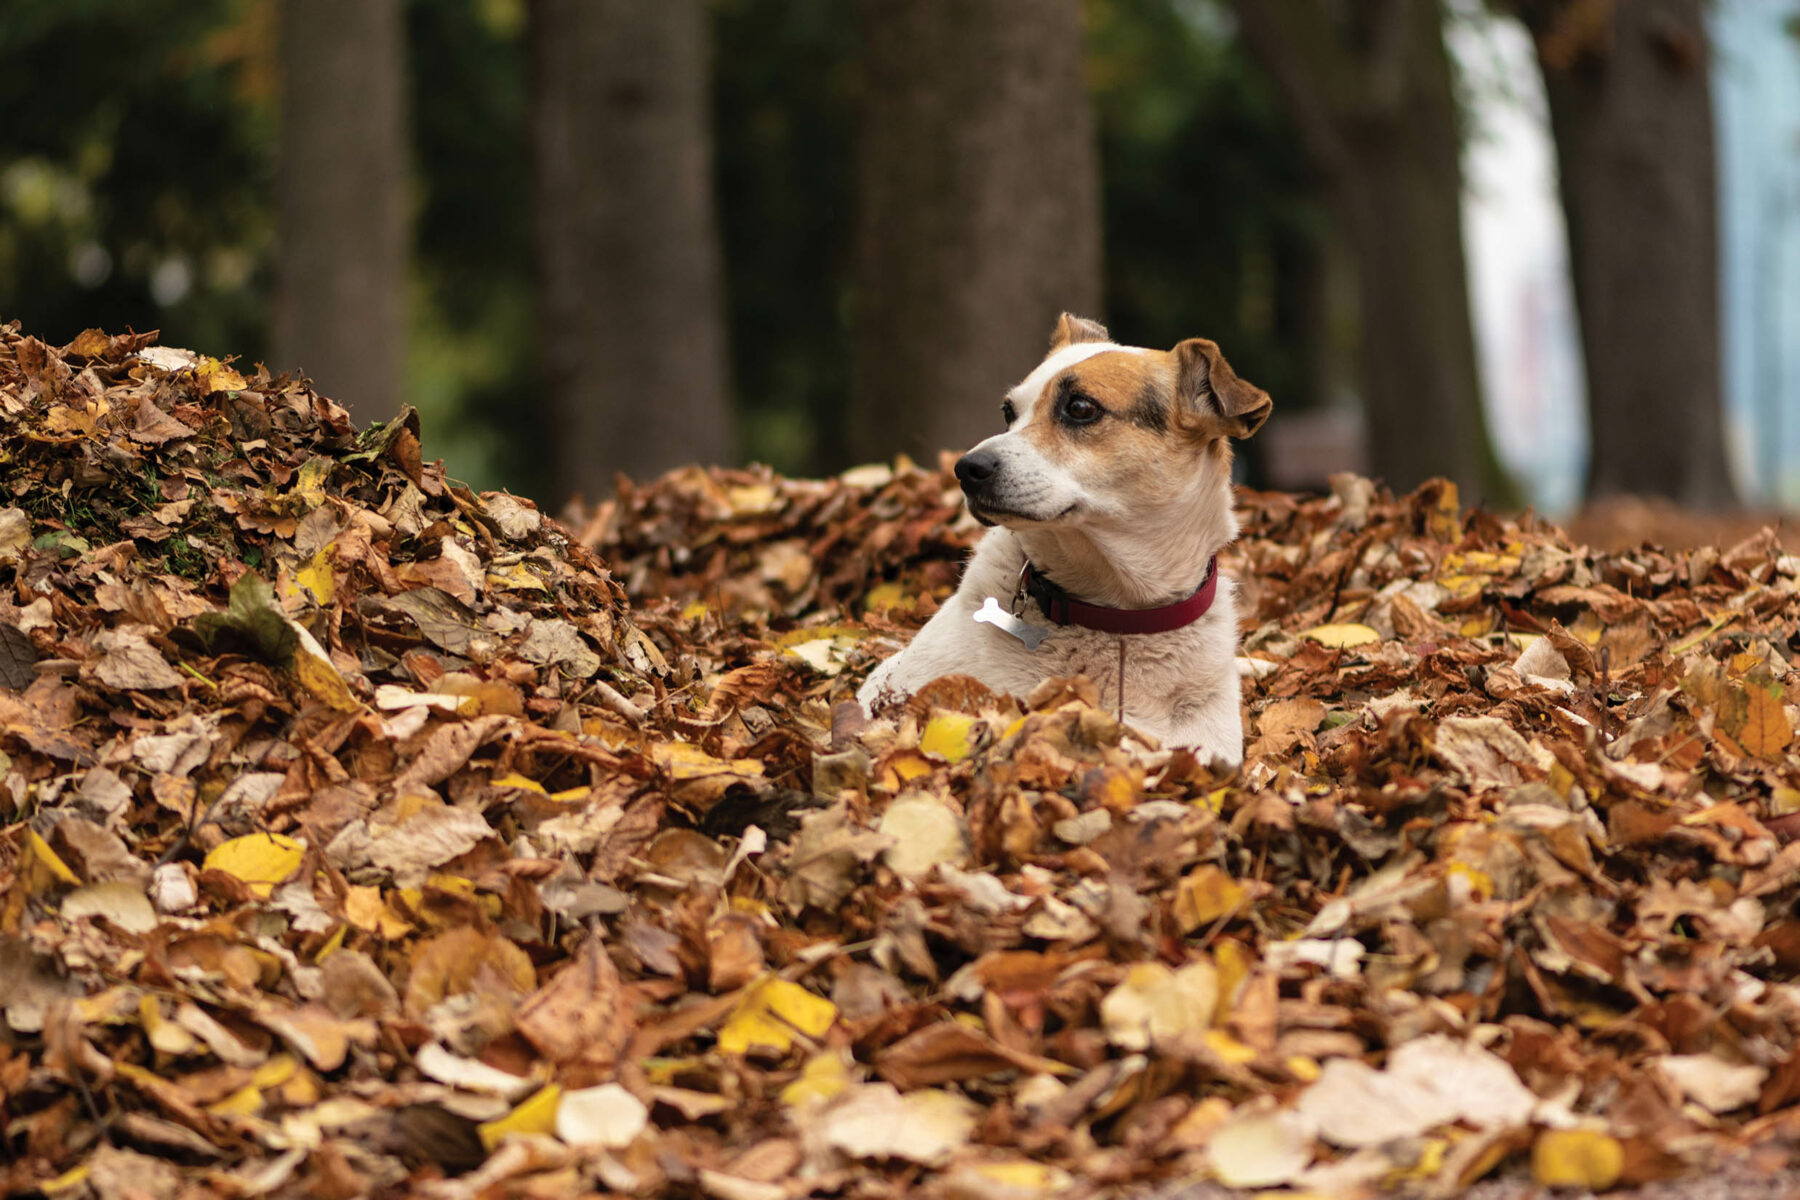 Dog in autumn leaves.